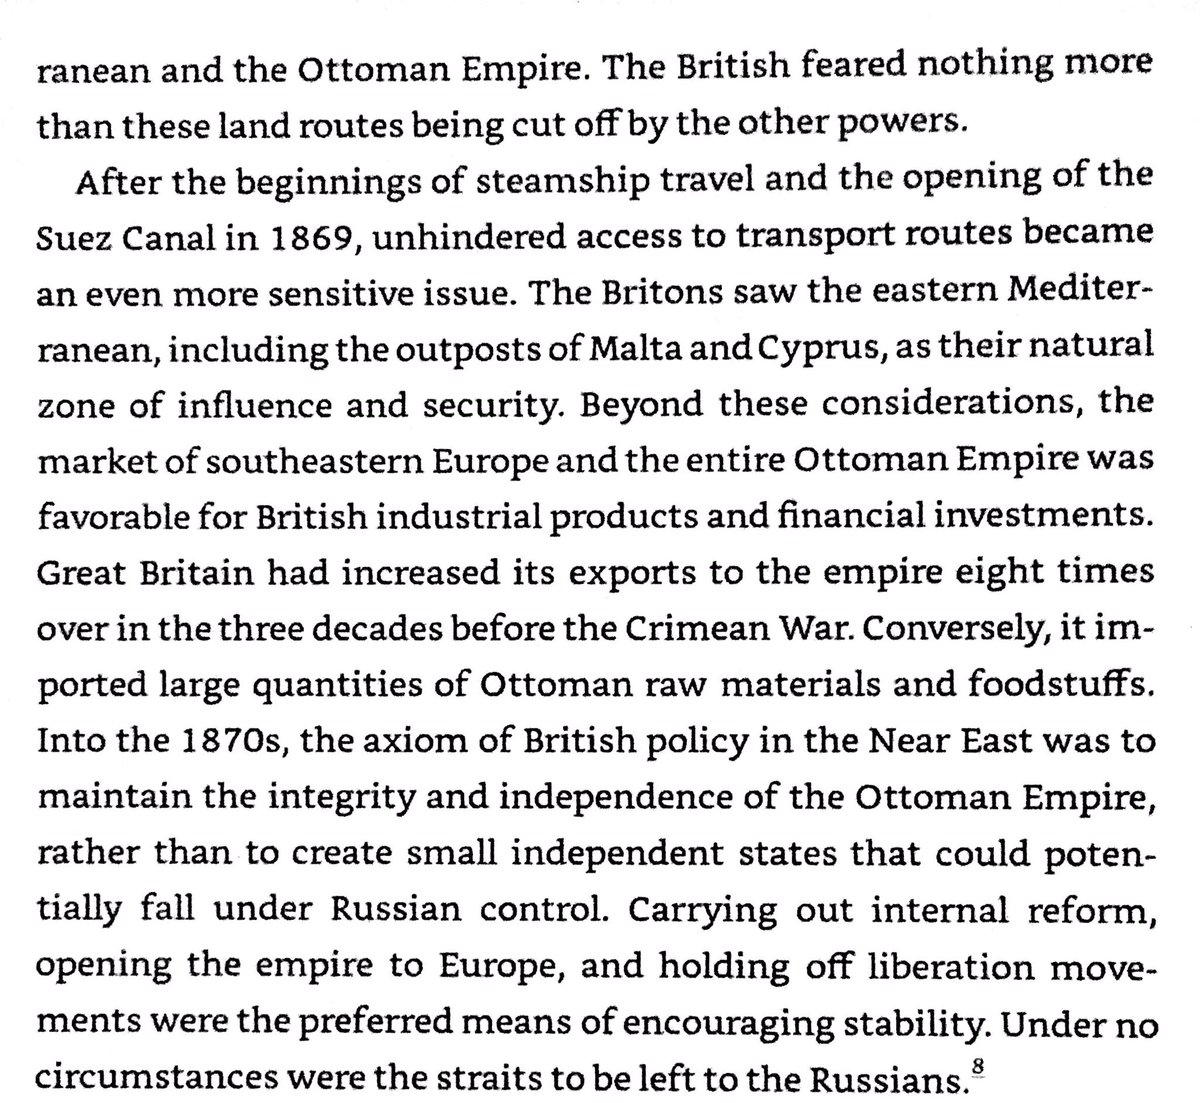 Britain wanted to keep Ottomans stable & open for trade. They worried Russia would destroy Ottomans & break through Dardanelles to Mediterranean & global sea trade routes. Britain’s free trade deal with Ottomans in 1838 let British manufacturered goods dominate Ottoman markets.